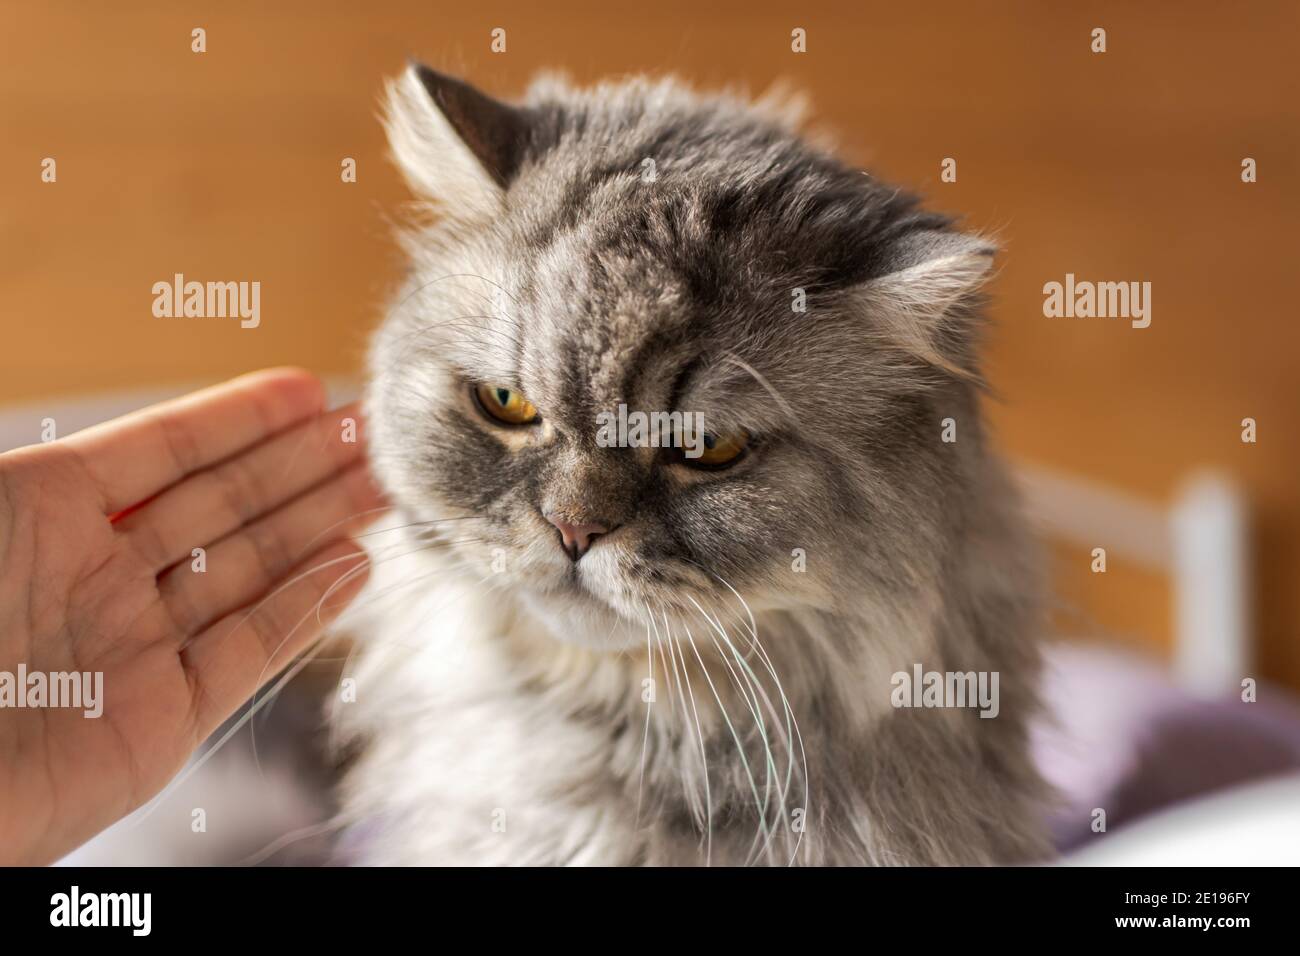 A disgruntled cat who has misbehaved, and his mistress scolds him. An angry expression on the cat's face. Close-up portrait of a fluffy grey Scottish Stock Photo